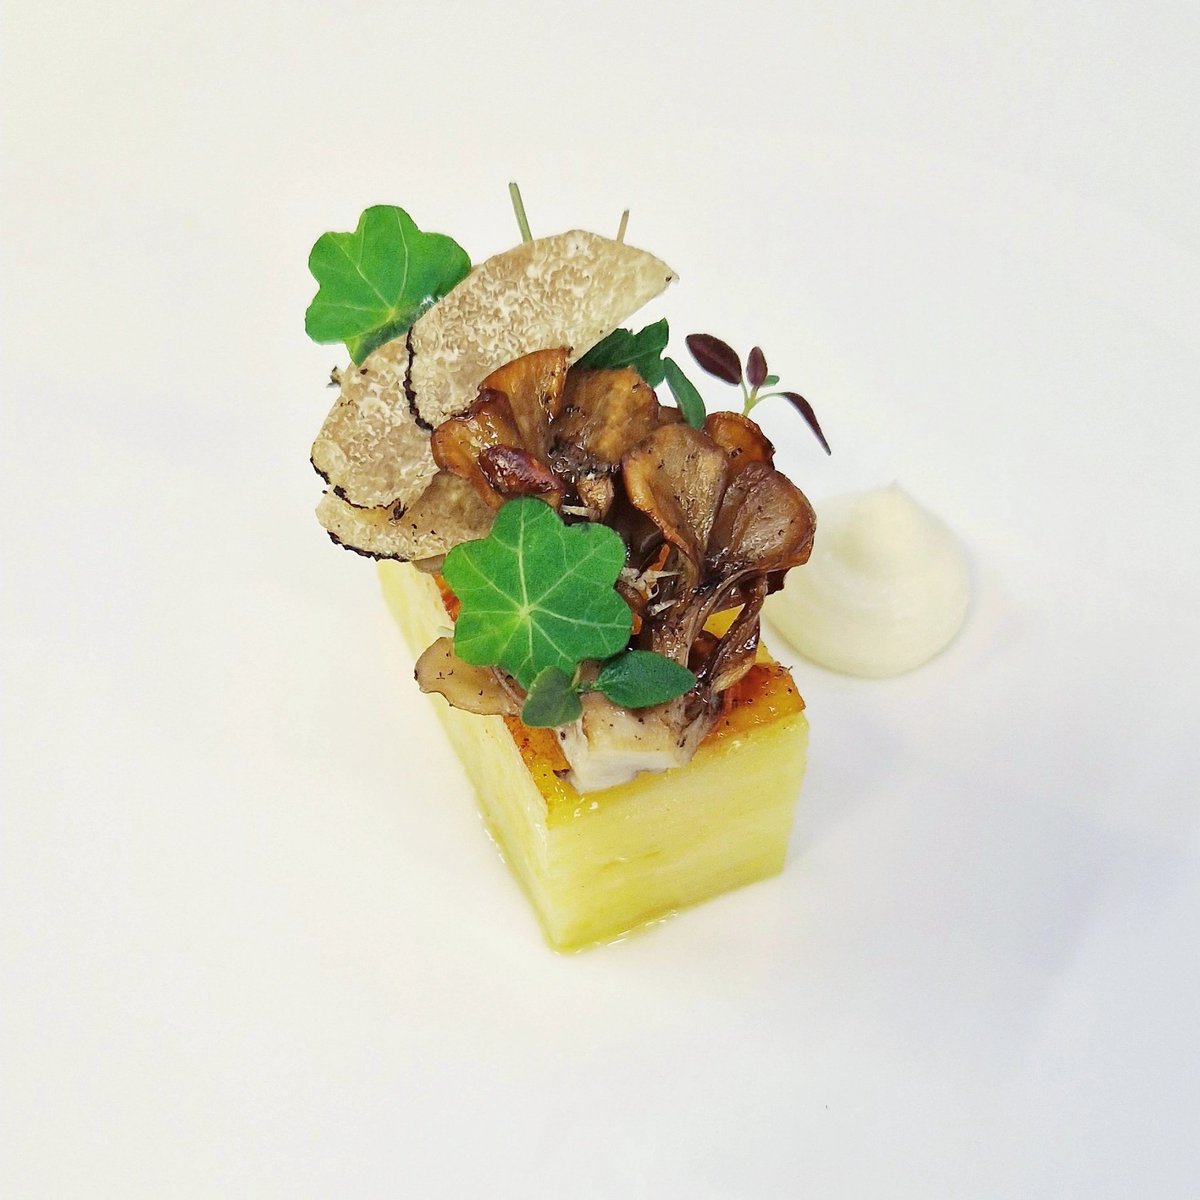 Maris piper / hen of the woods / baron bigod / truffle Slow cooked layered maris piper, pressed overnight & finished in beurre noisette. Roasted hen of the woods, whipped baron bigod & shaved black truffle. • #passionate #chefs #chef #brigade #ingredients #foodie #pommedeterre